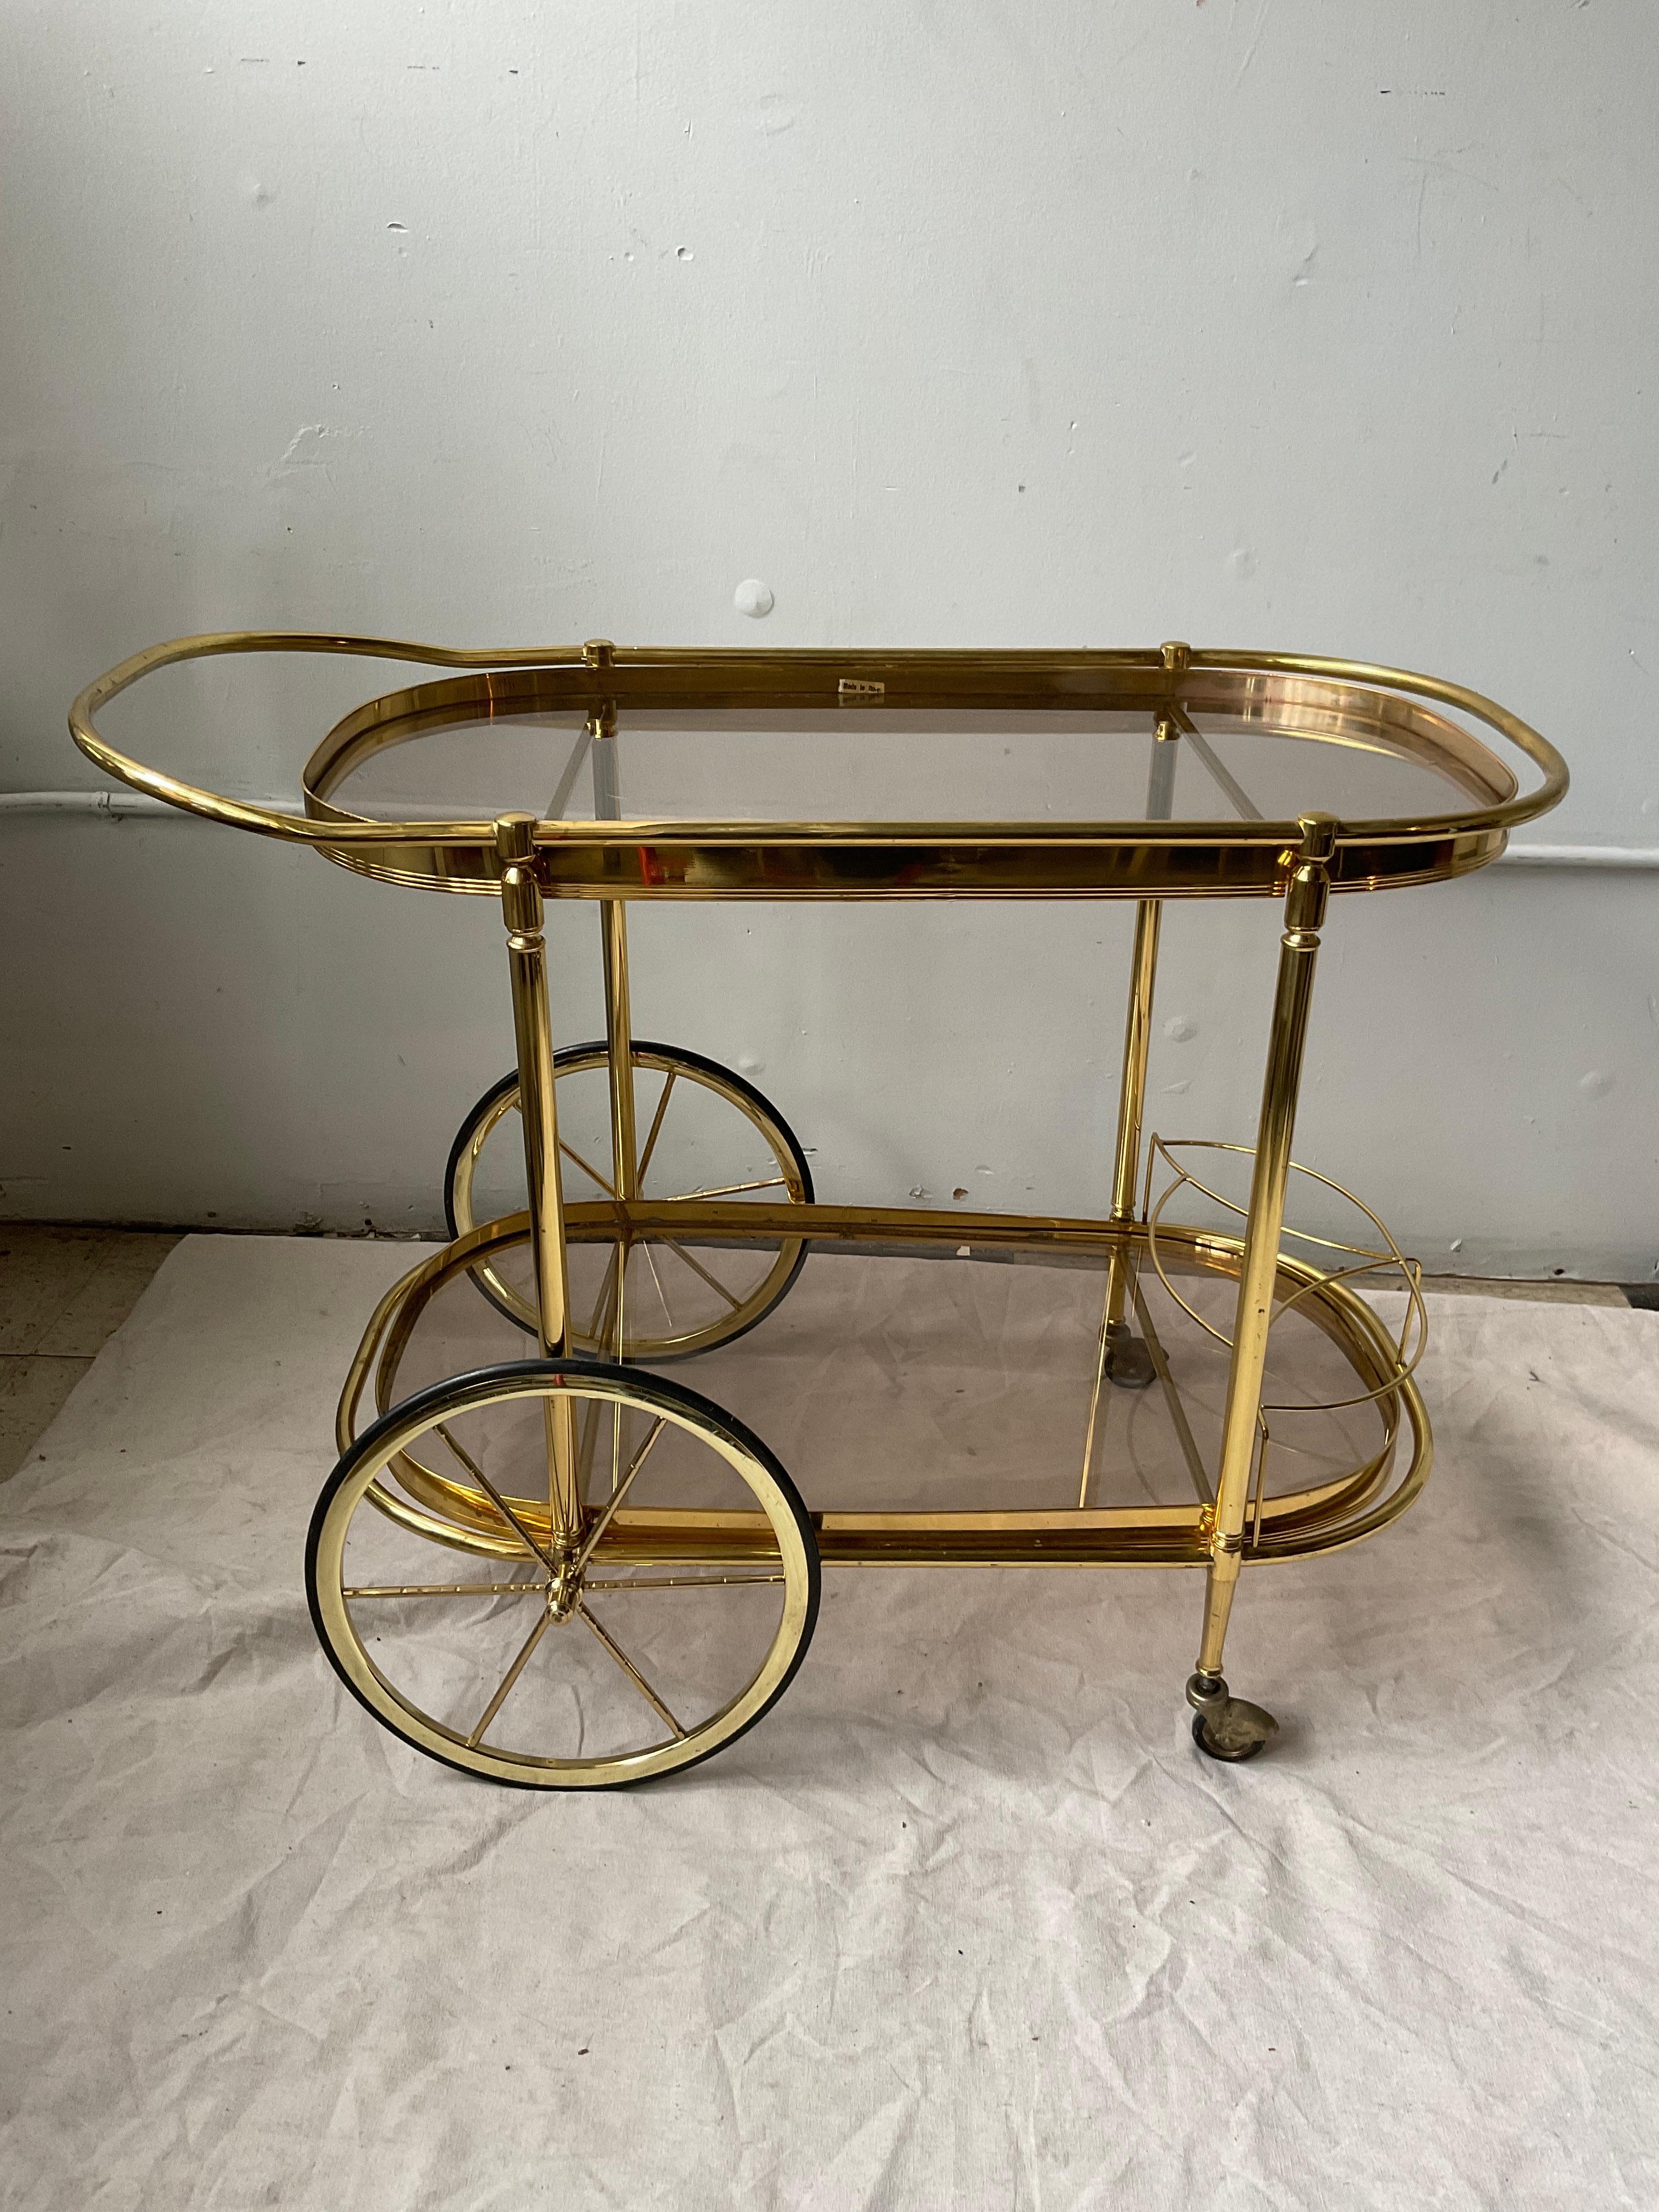 1970s Italian bar cart  in a brass finish. Brass is rubbed away in one area as seen in picture 7. Some black marks on cart.
One piece of glass has chips on underside.
Glass does not come out, it’s wedged in.